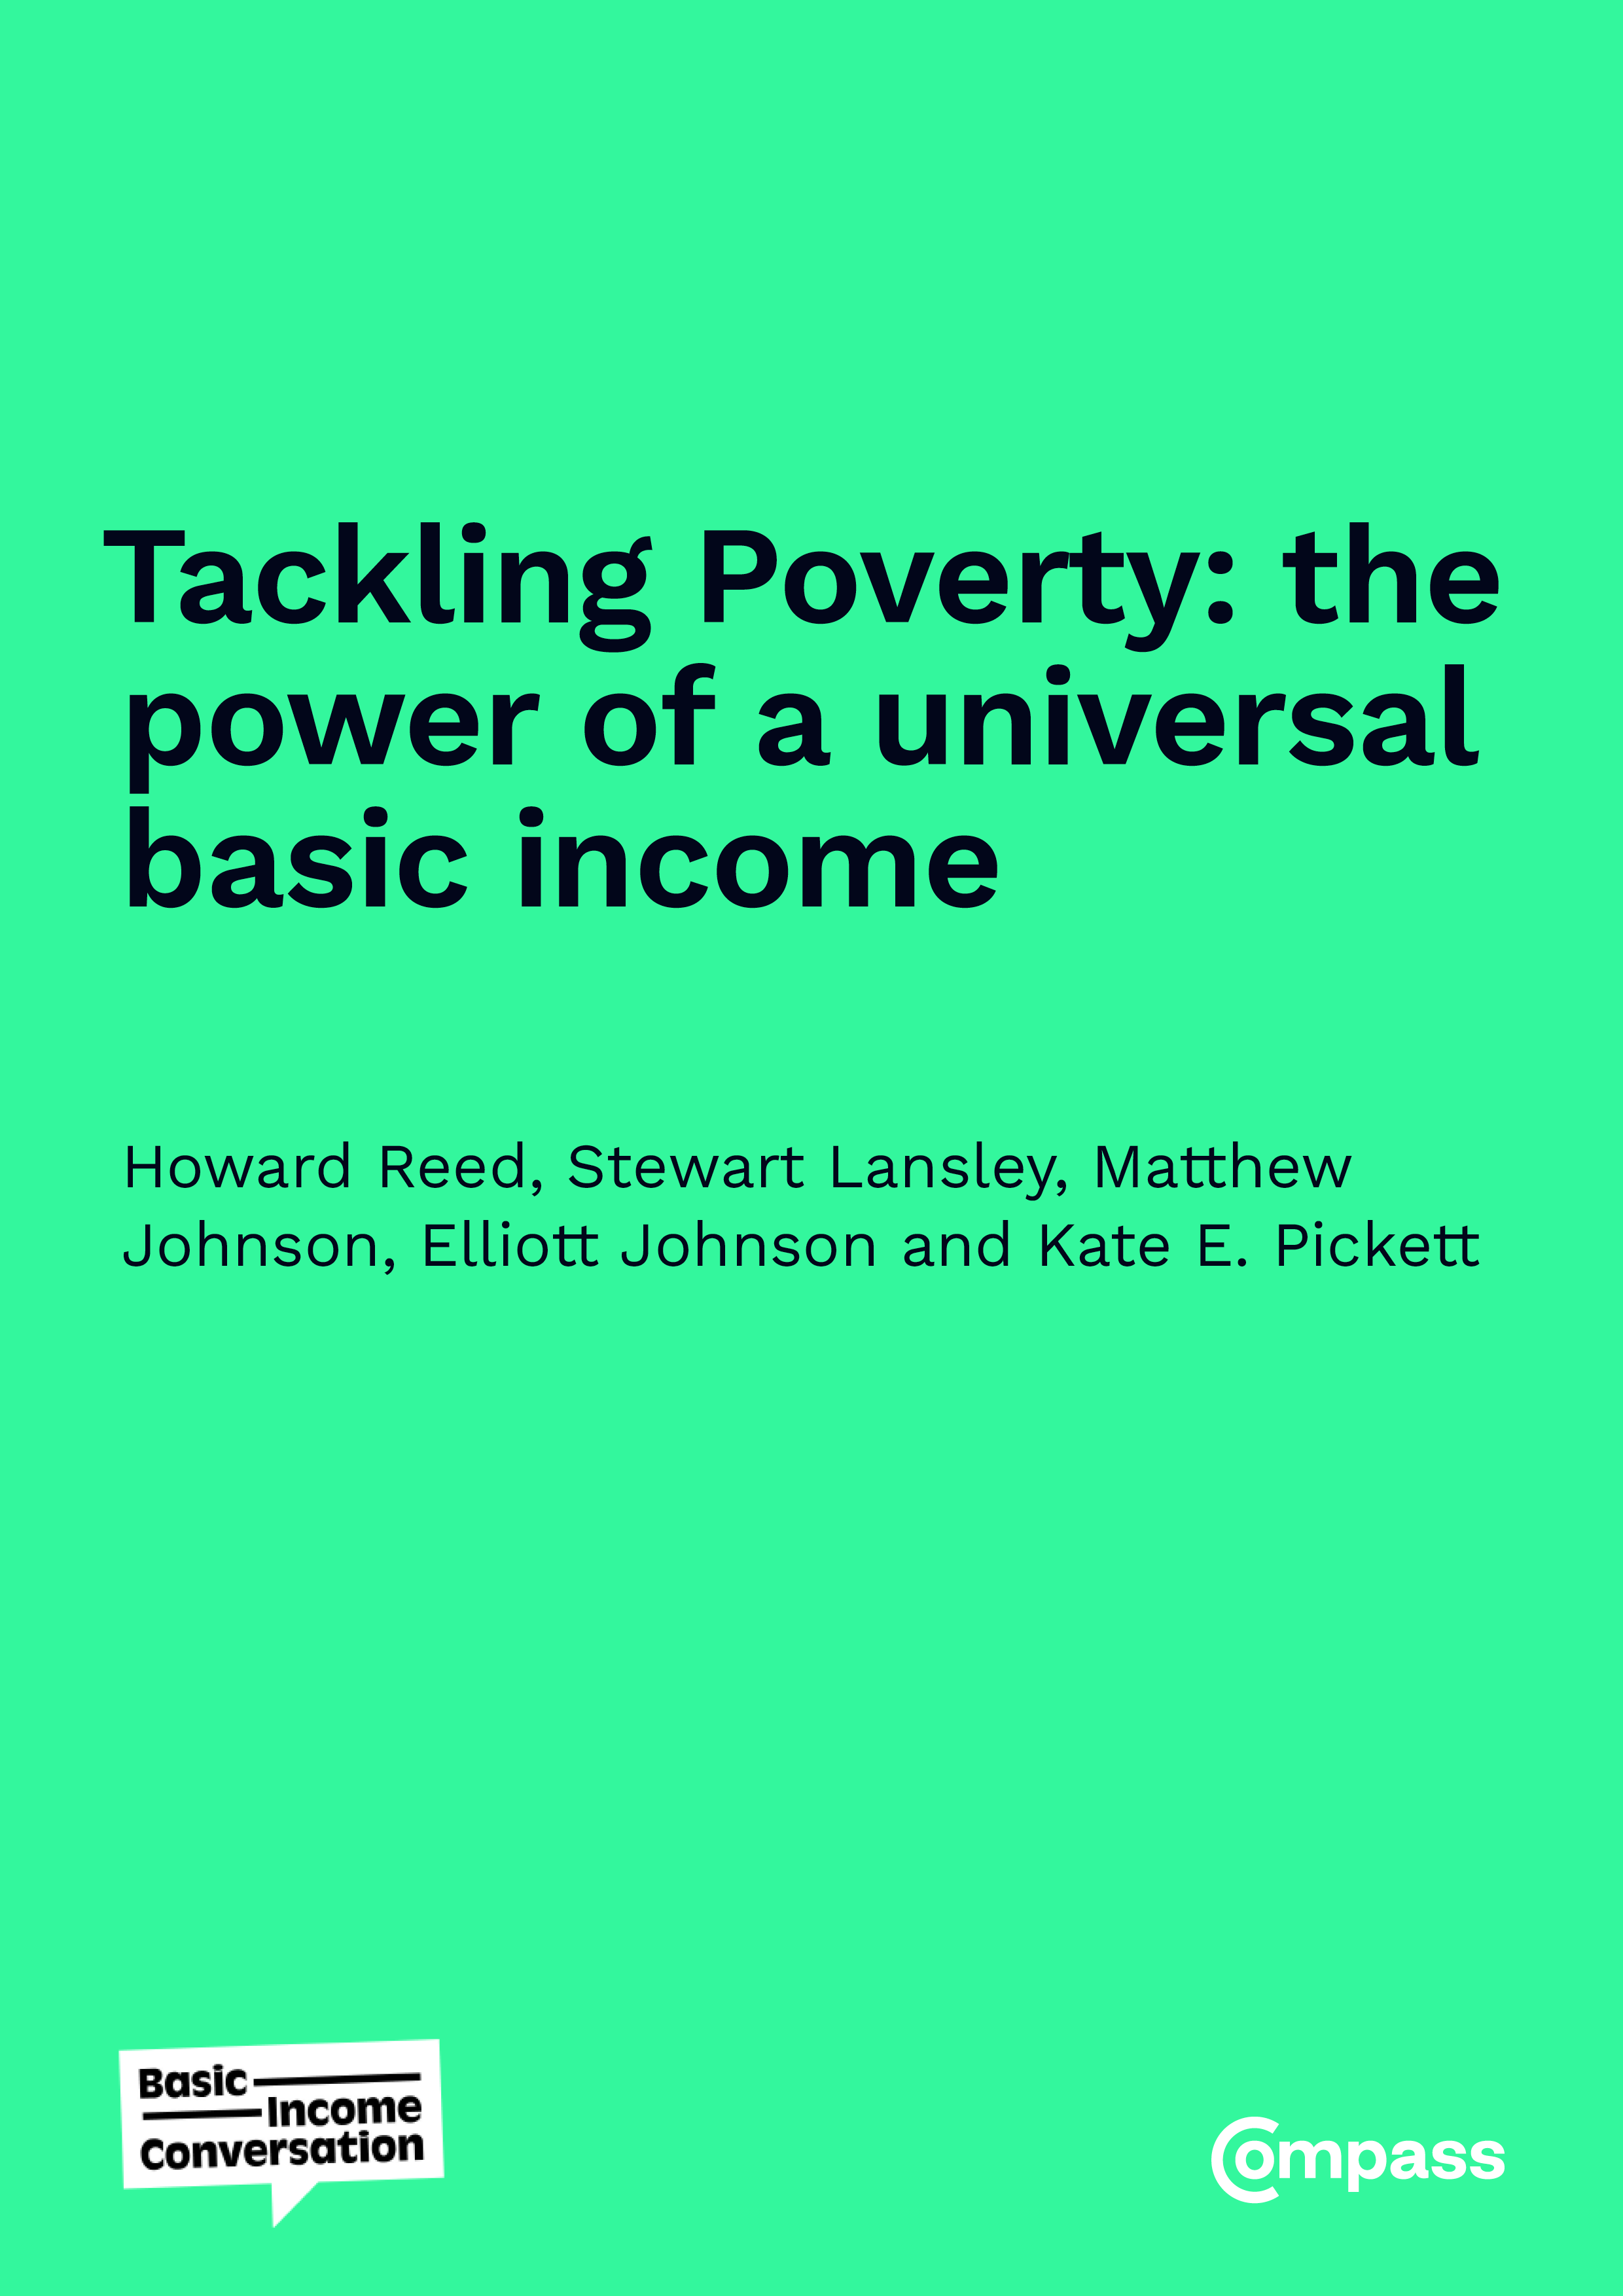 A modest basic income could cut poverty to lowest level in 60 years